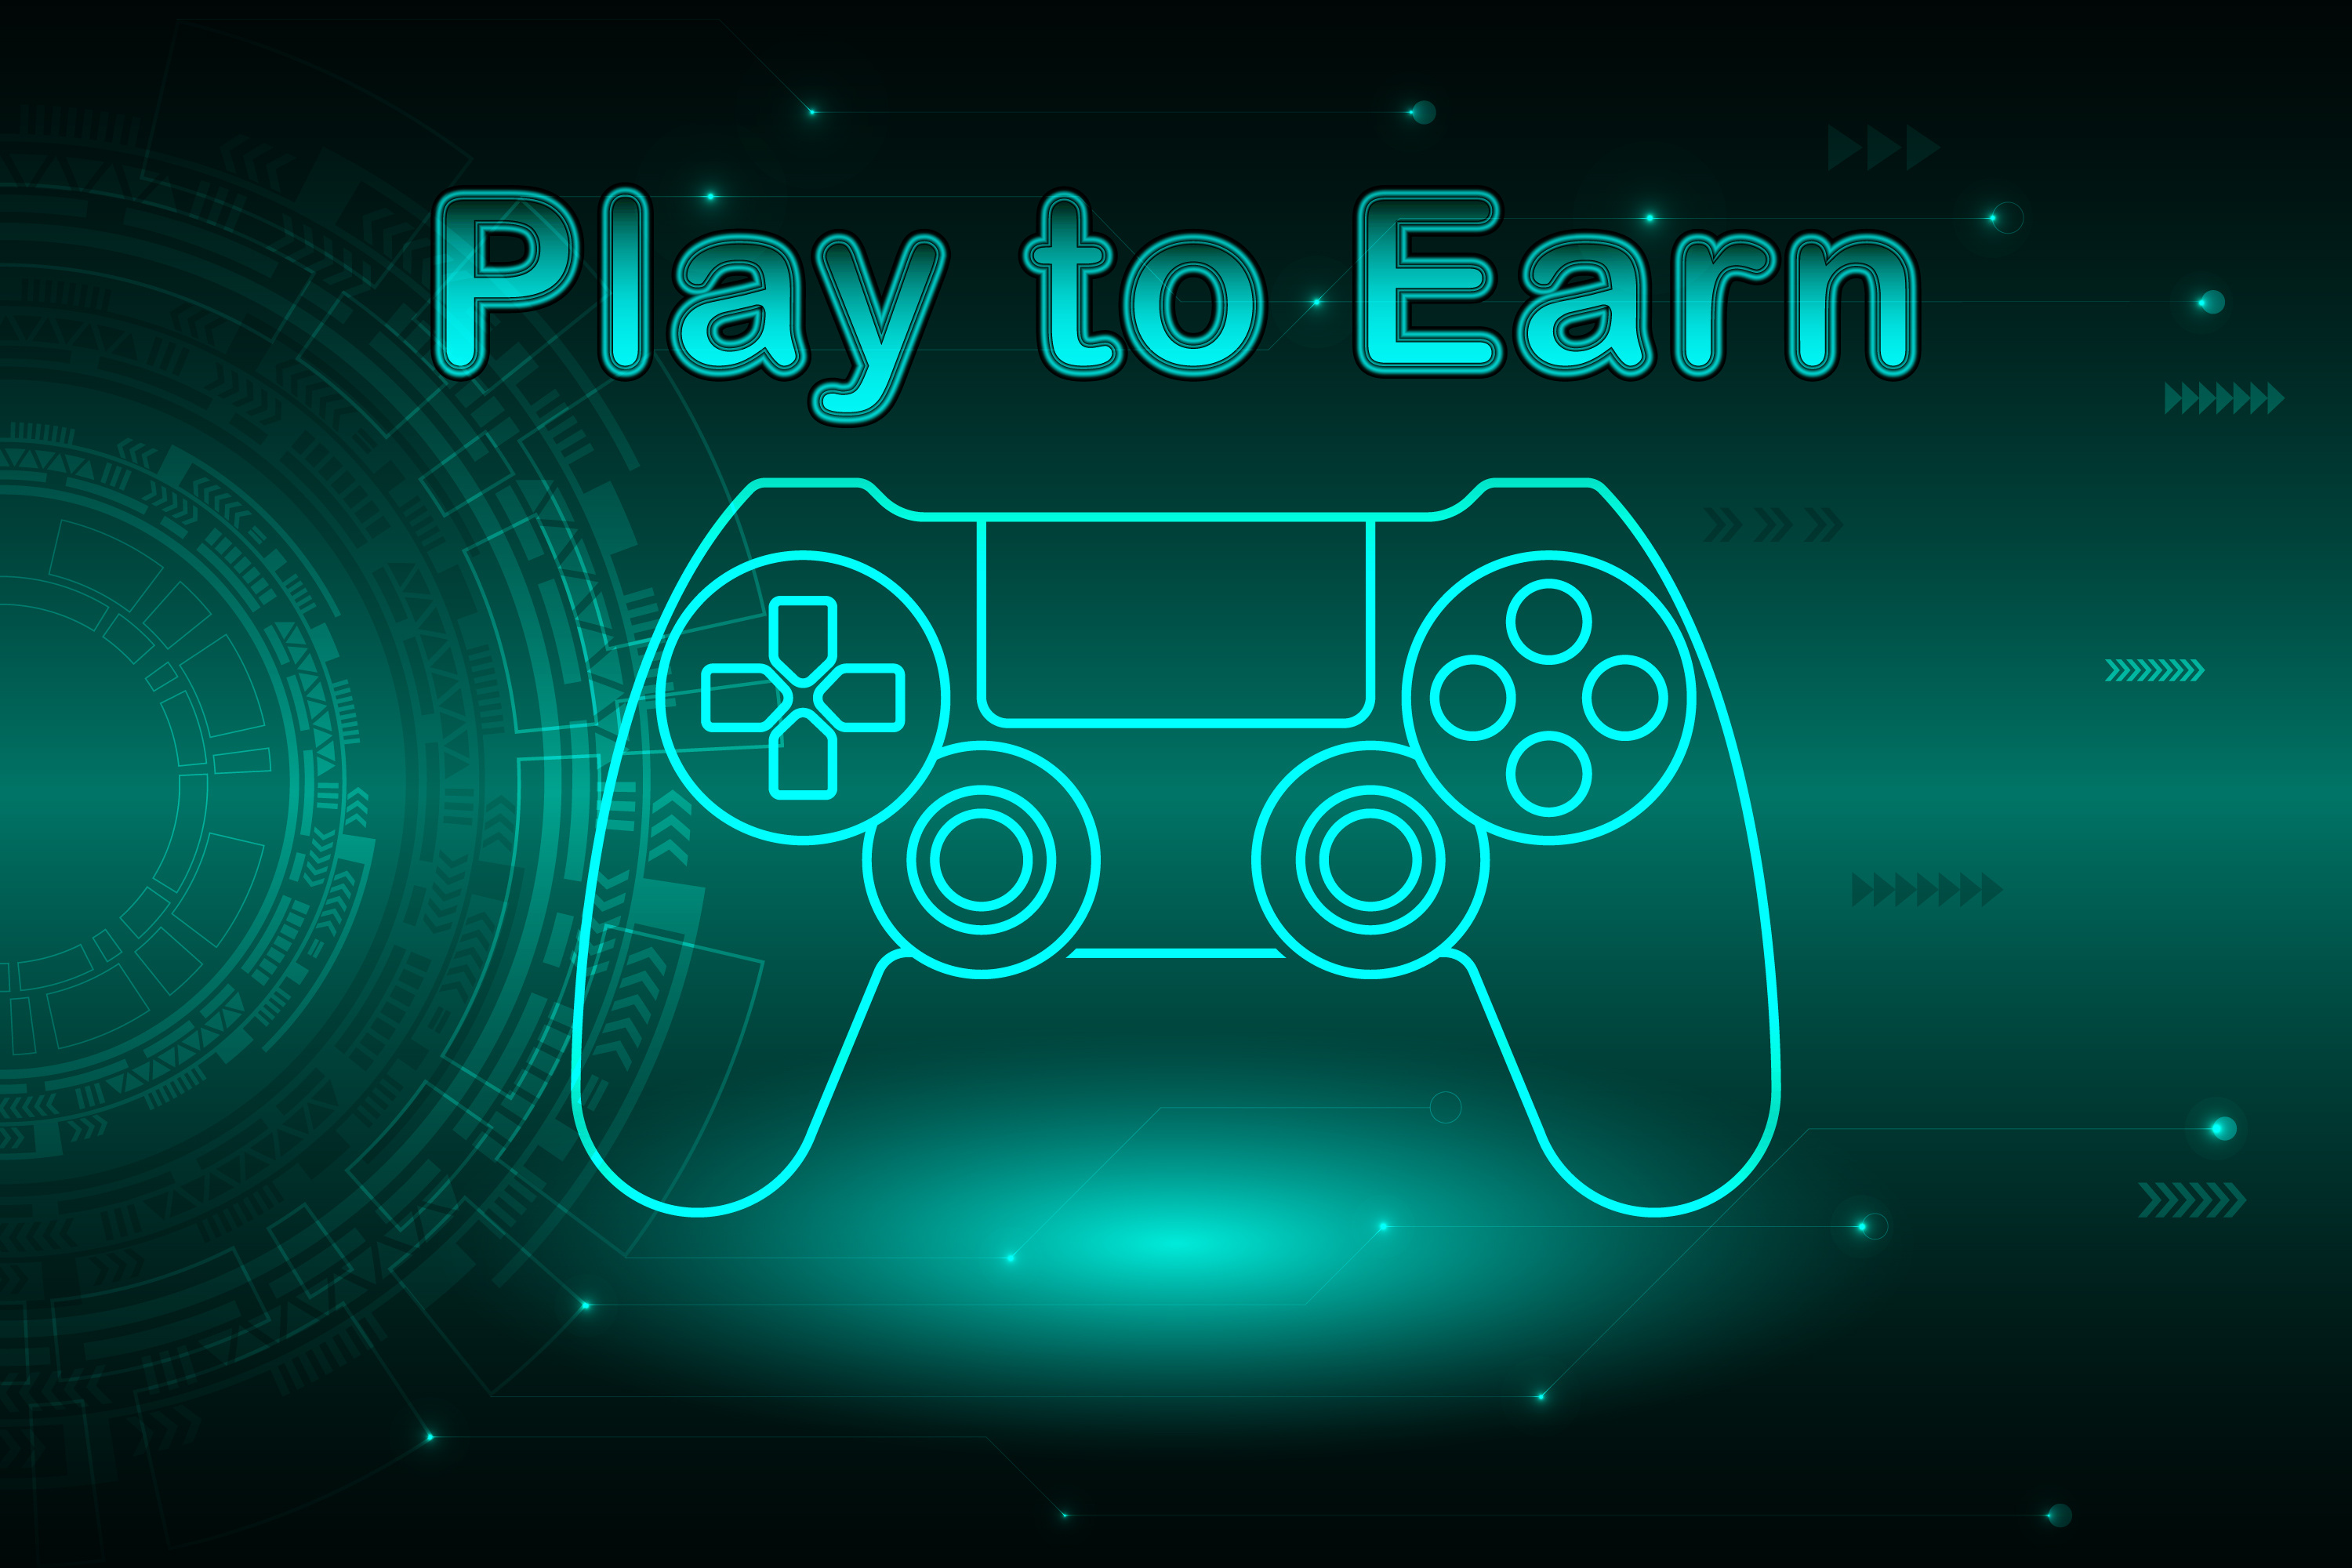 Best Blockchain Games to Play and Earn in 2022